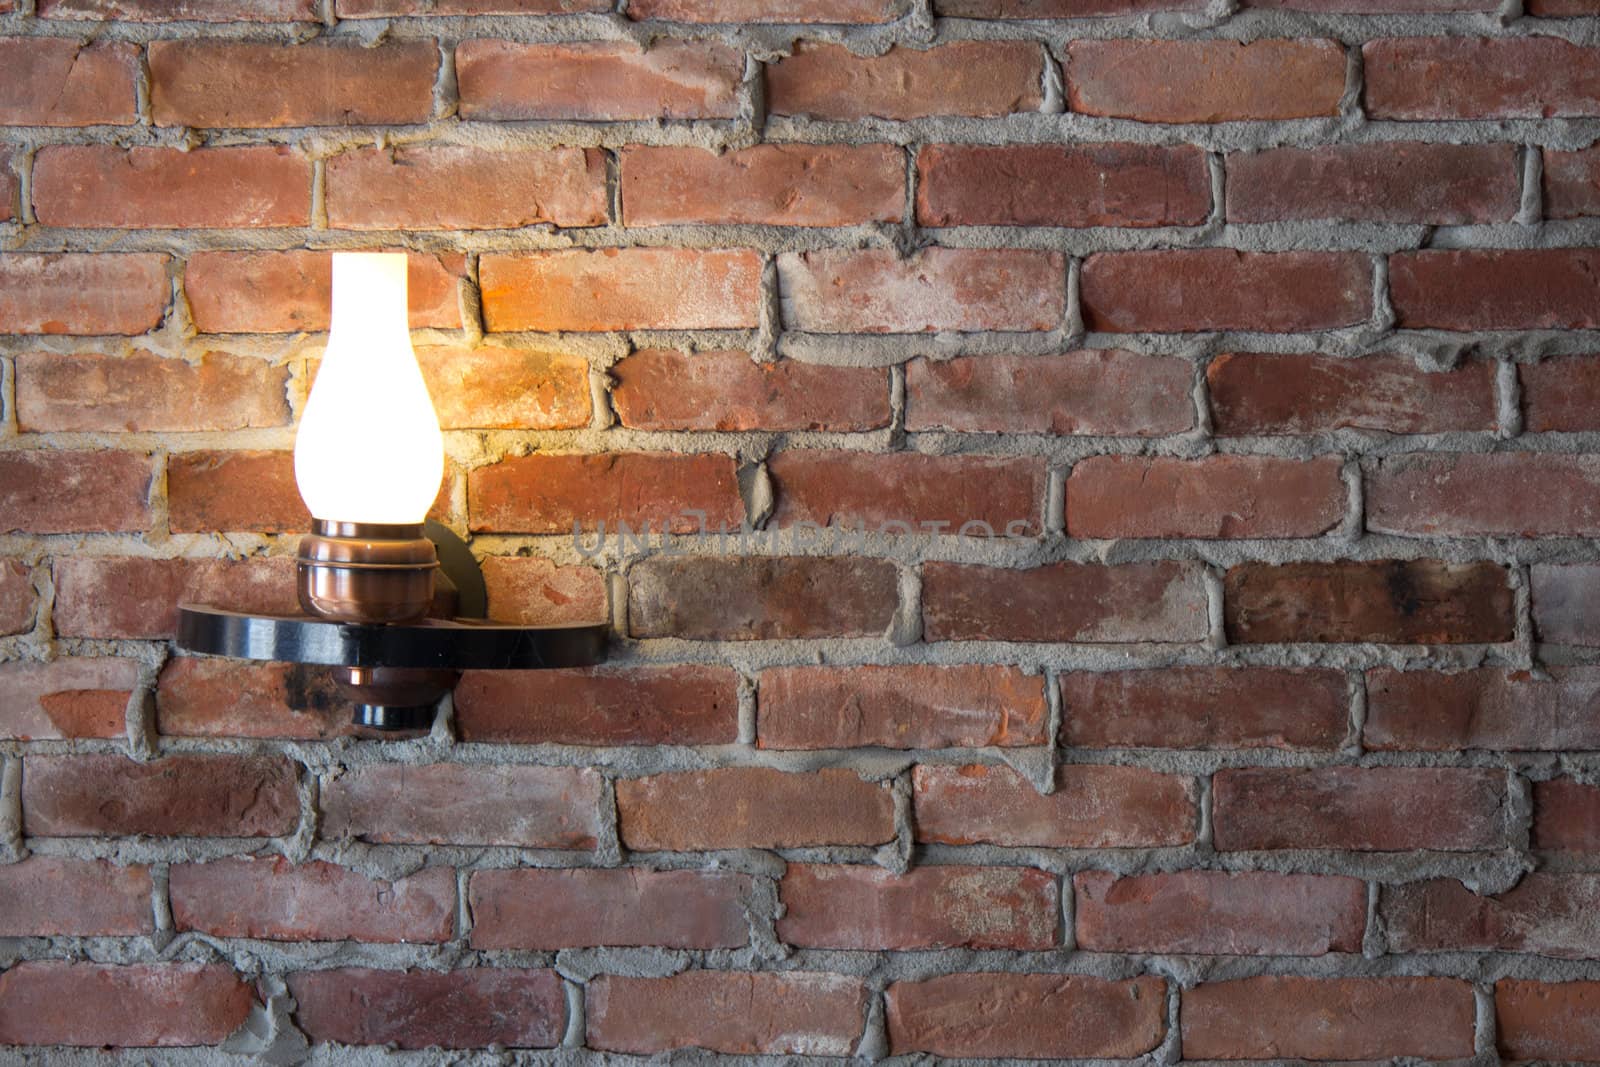 Old-fashioned sconce light on a brick wall.